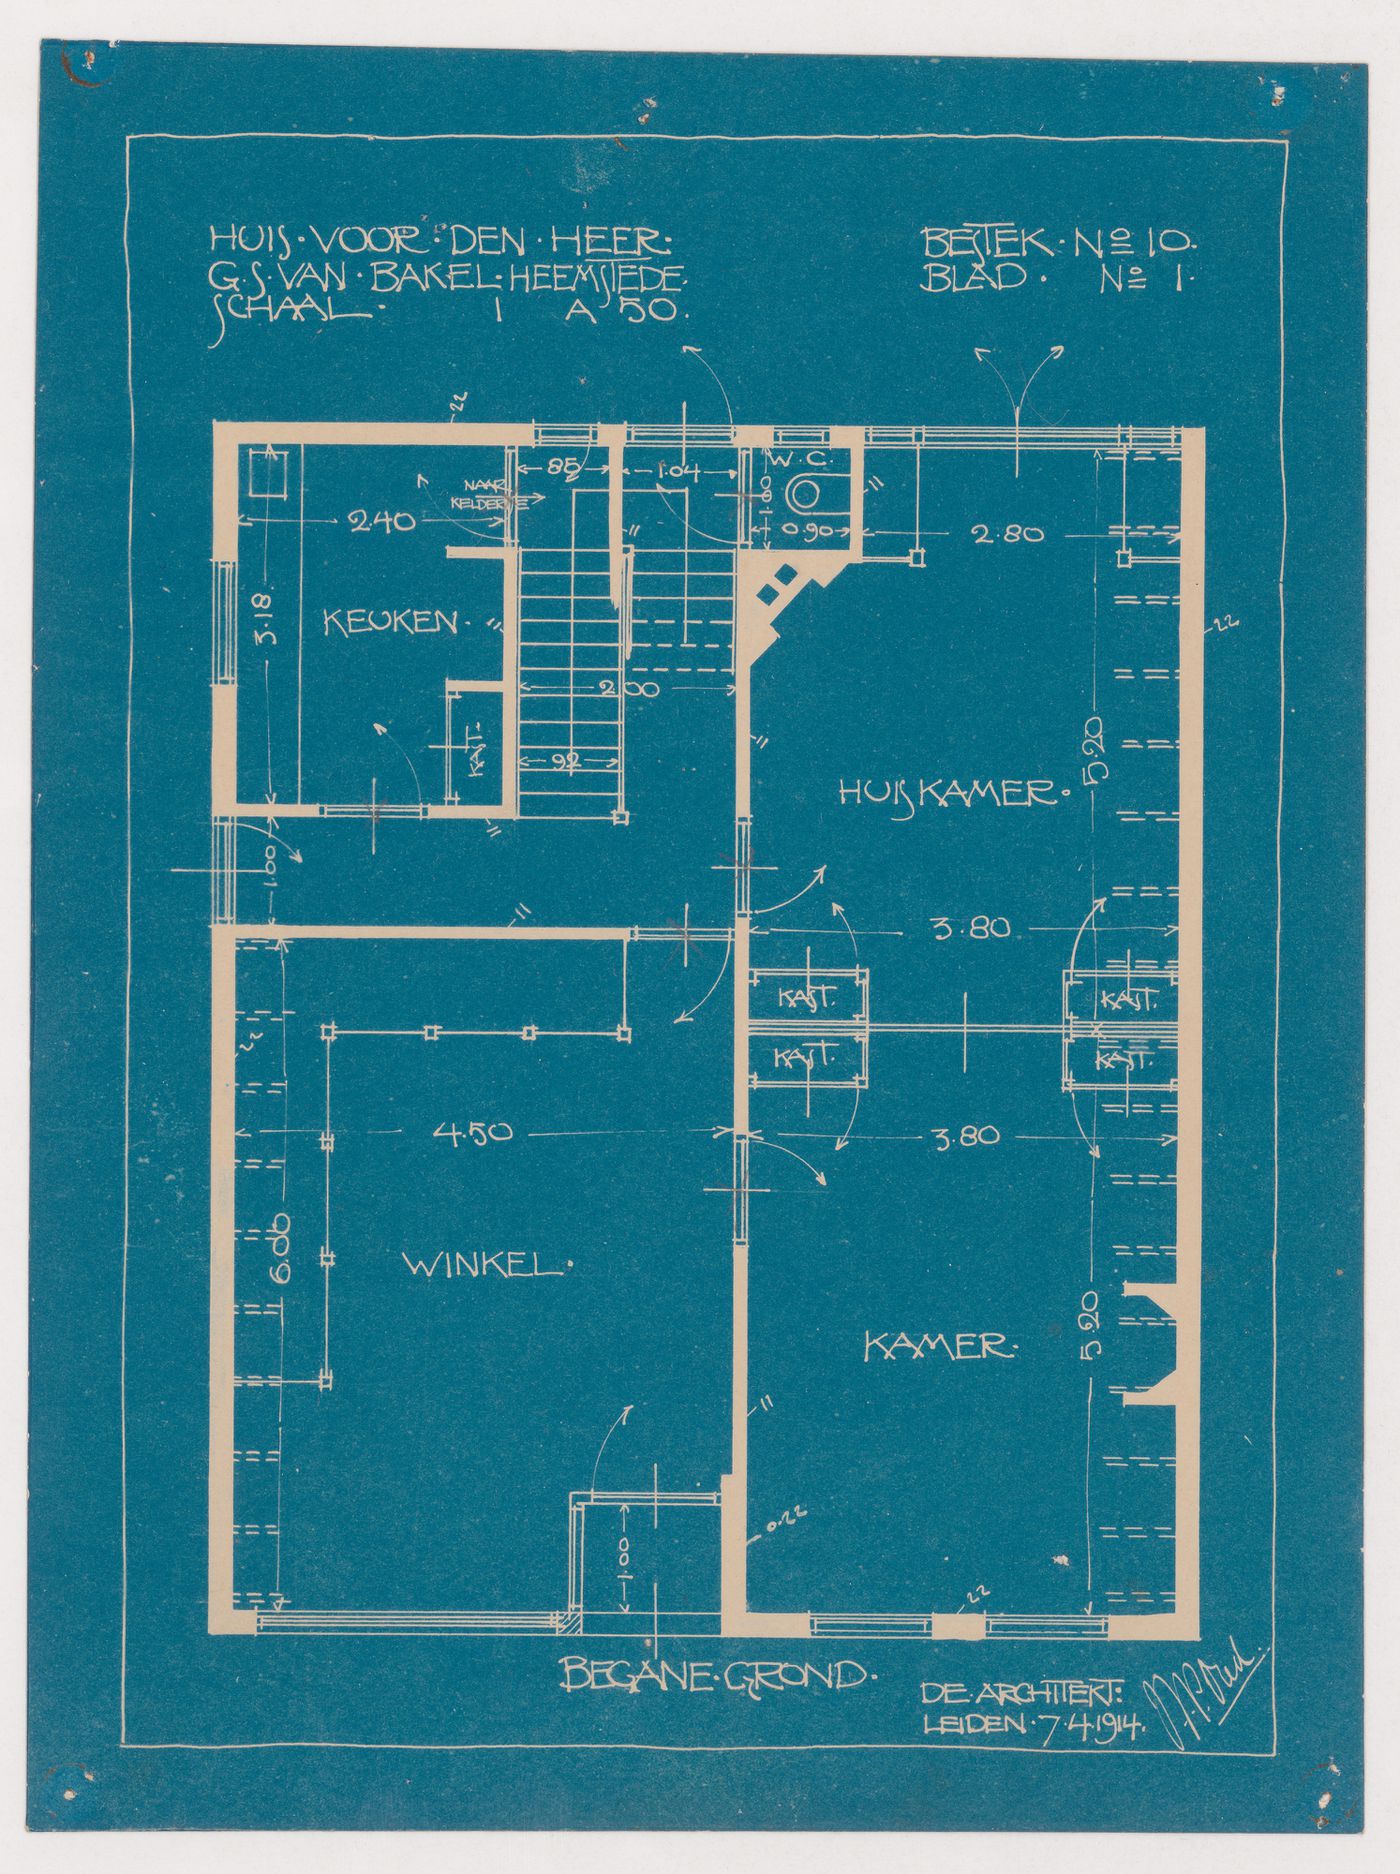 Ground floor plan for a house and shop with a rectangular plan for Mr. G.S. van Bakel, Heemstede, Netherlands